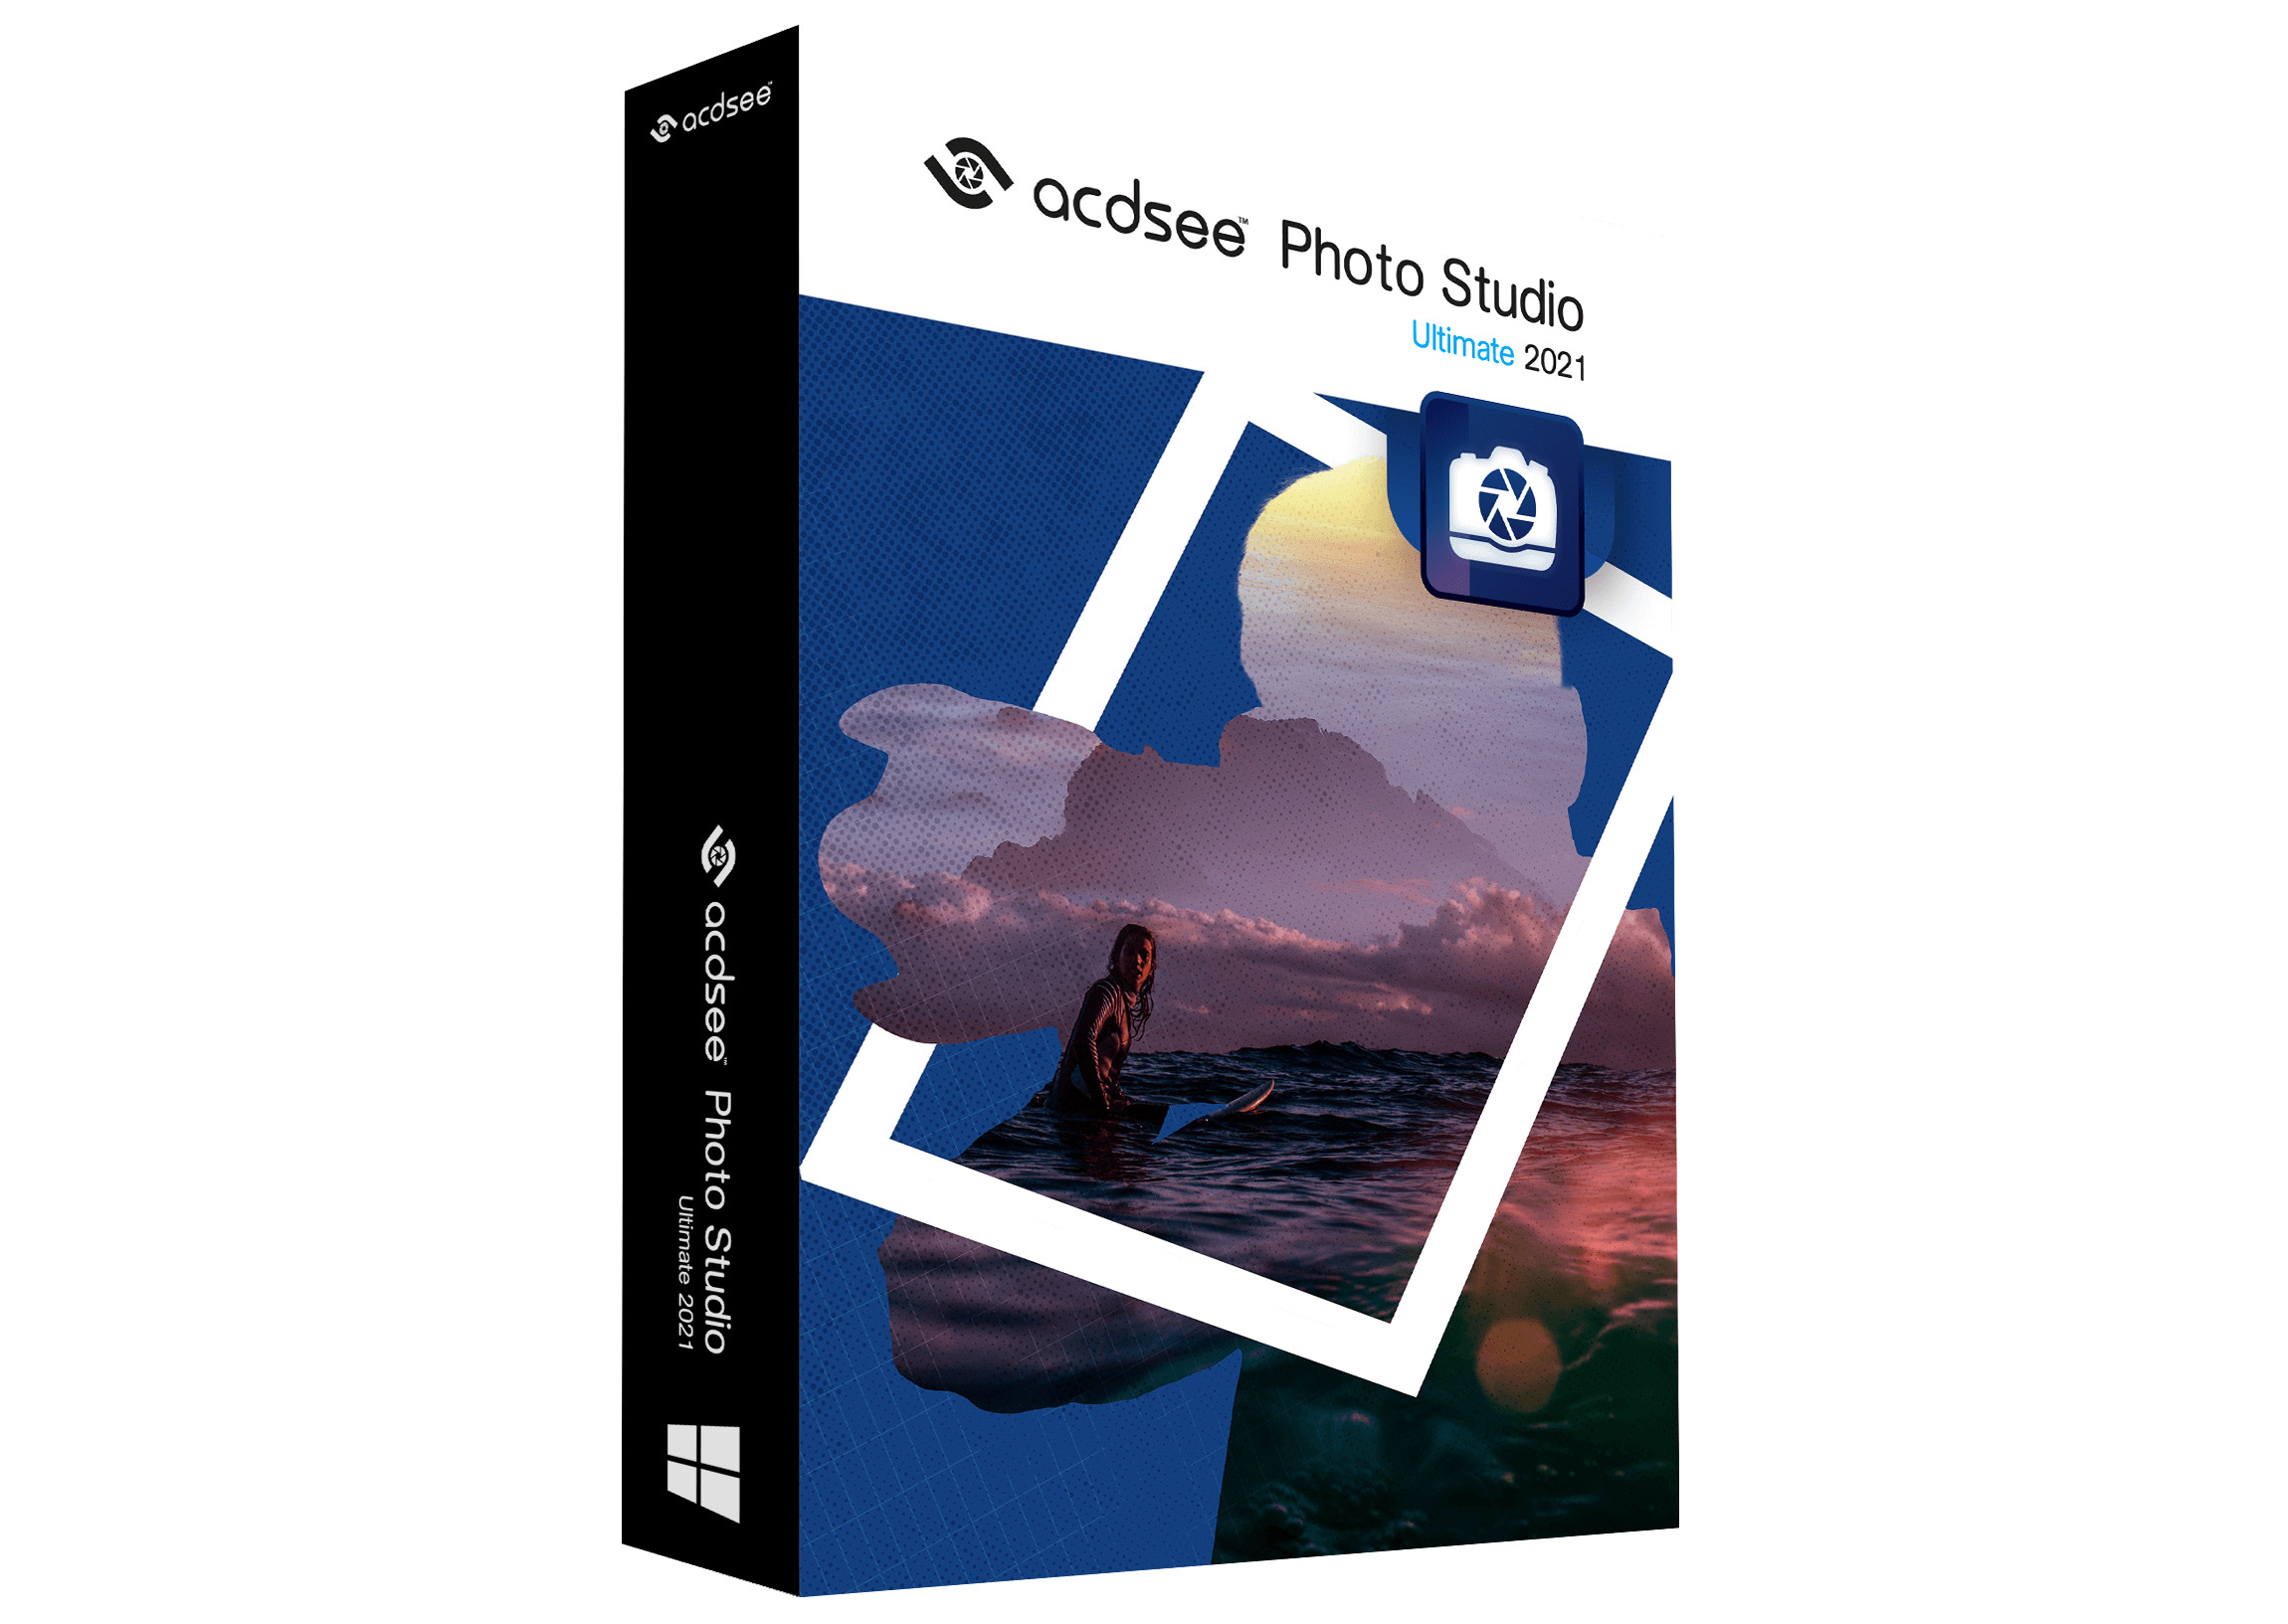 ACDSee Photo Studio Ultimate 2021 Key (6 Months / 1 PC) [USD 11.29]